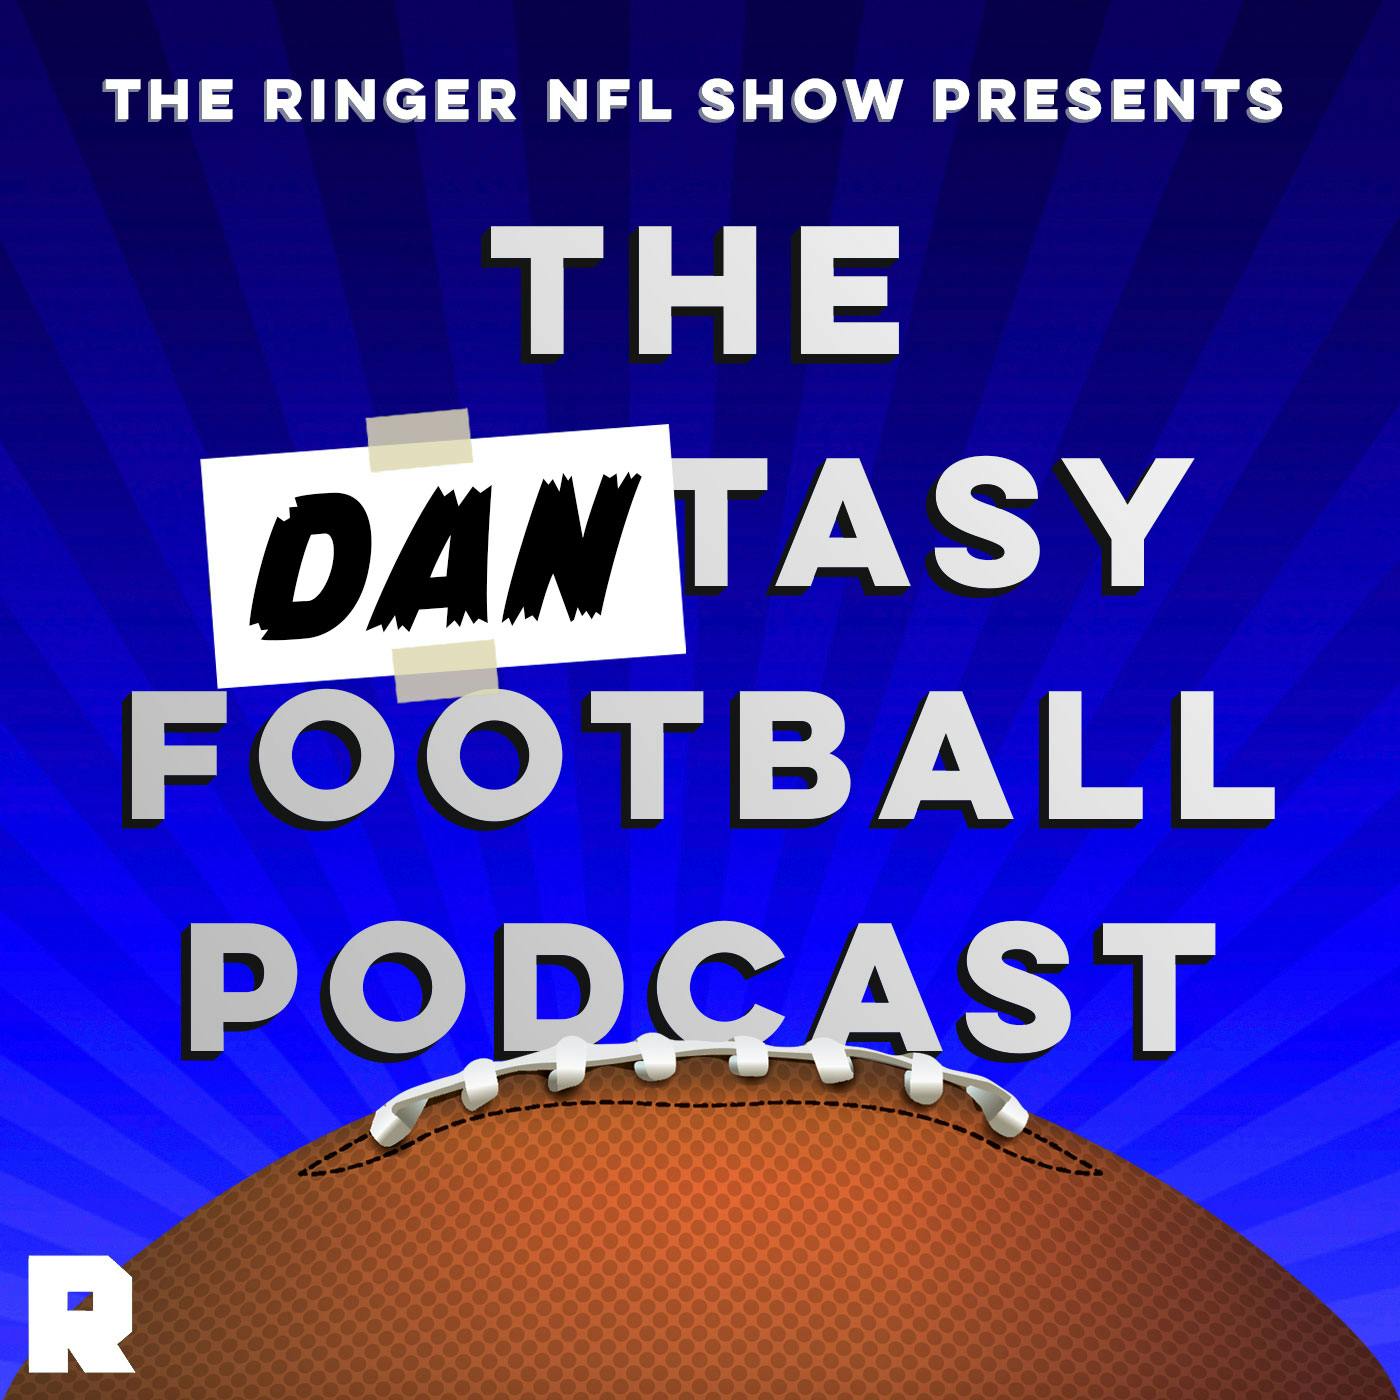 15 Players You Need to Draft This Year | The Dantasy Football Podcast